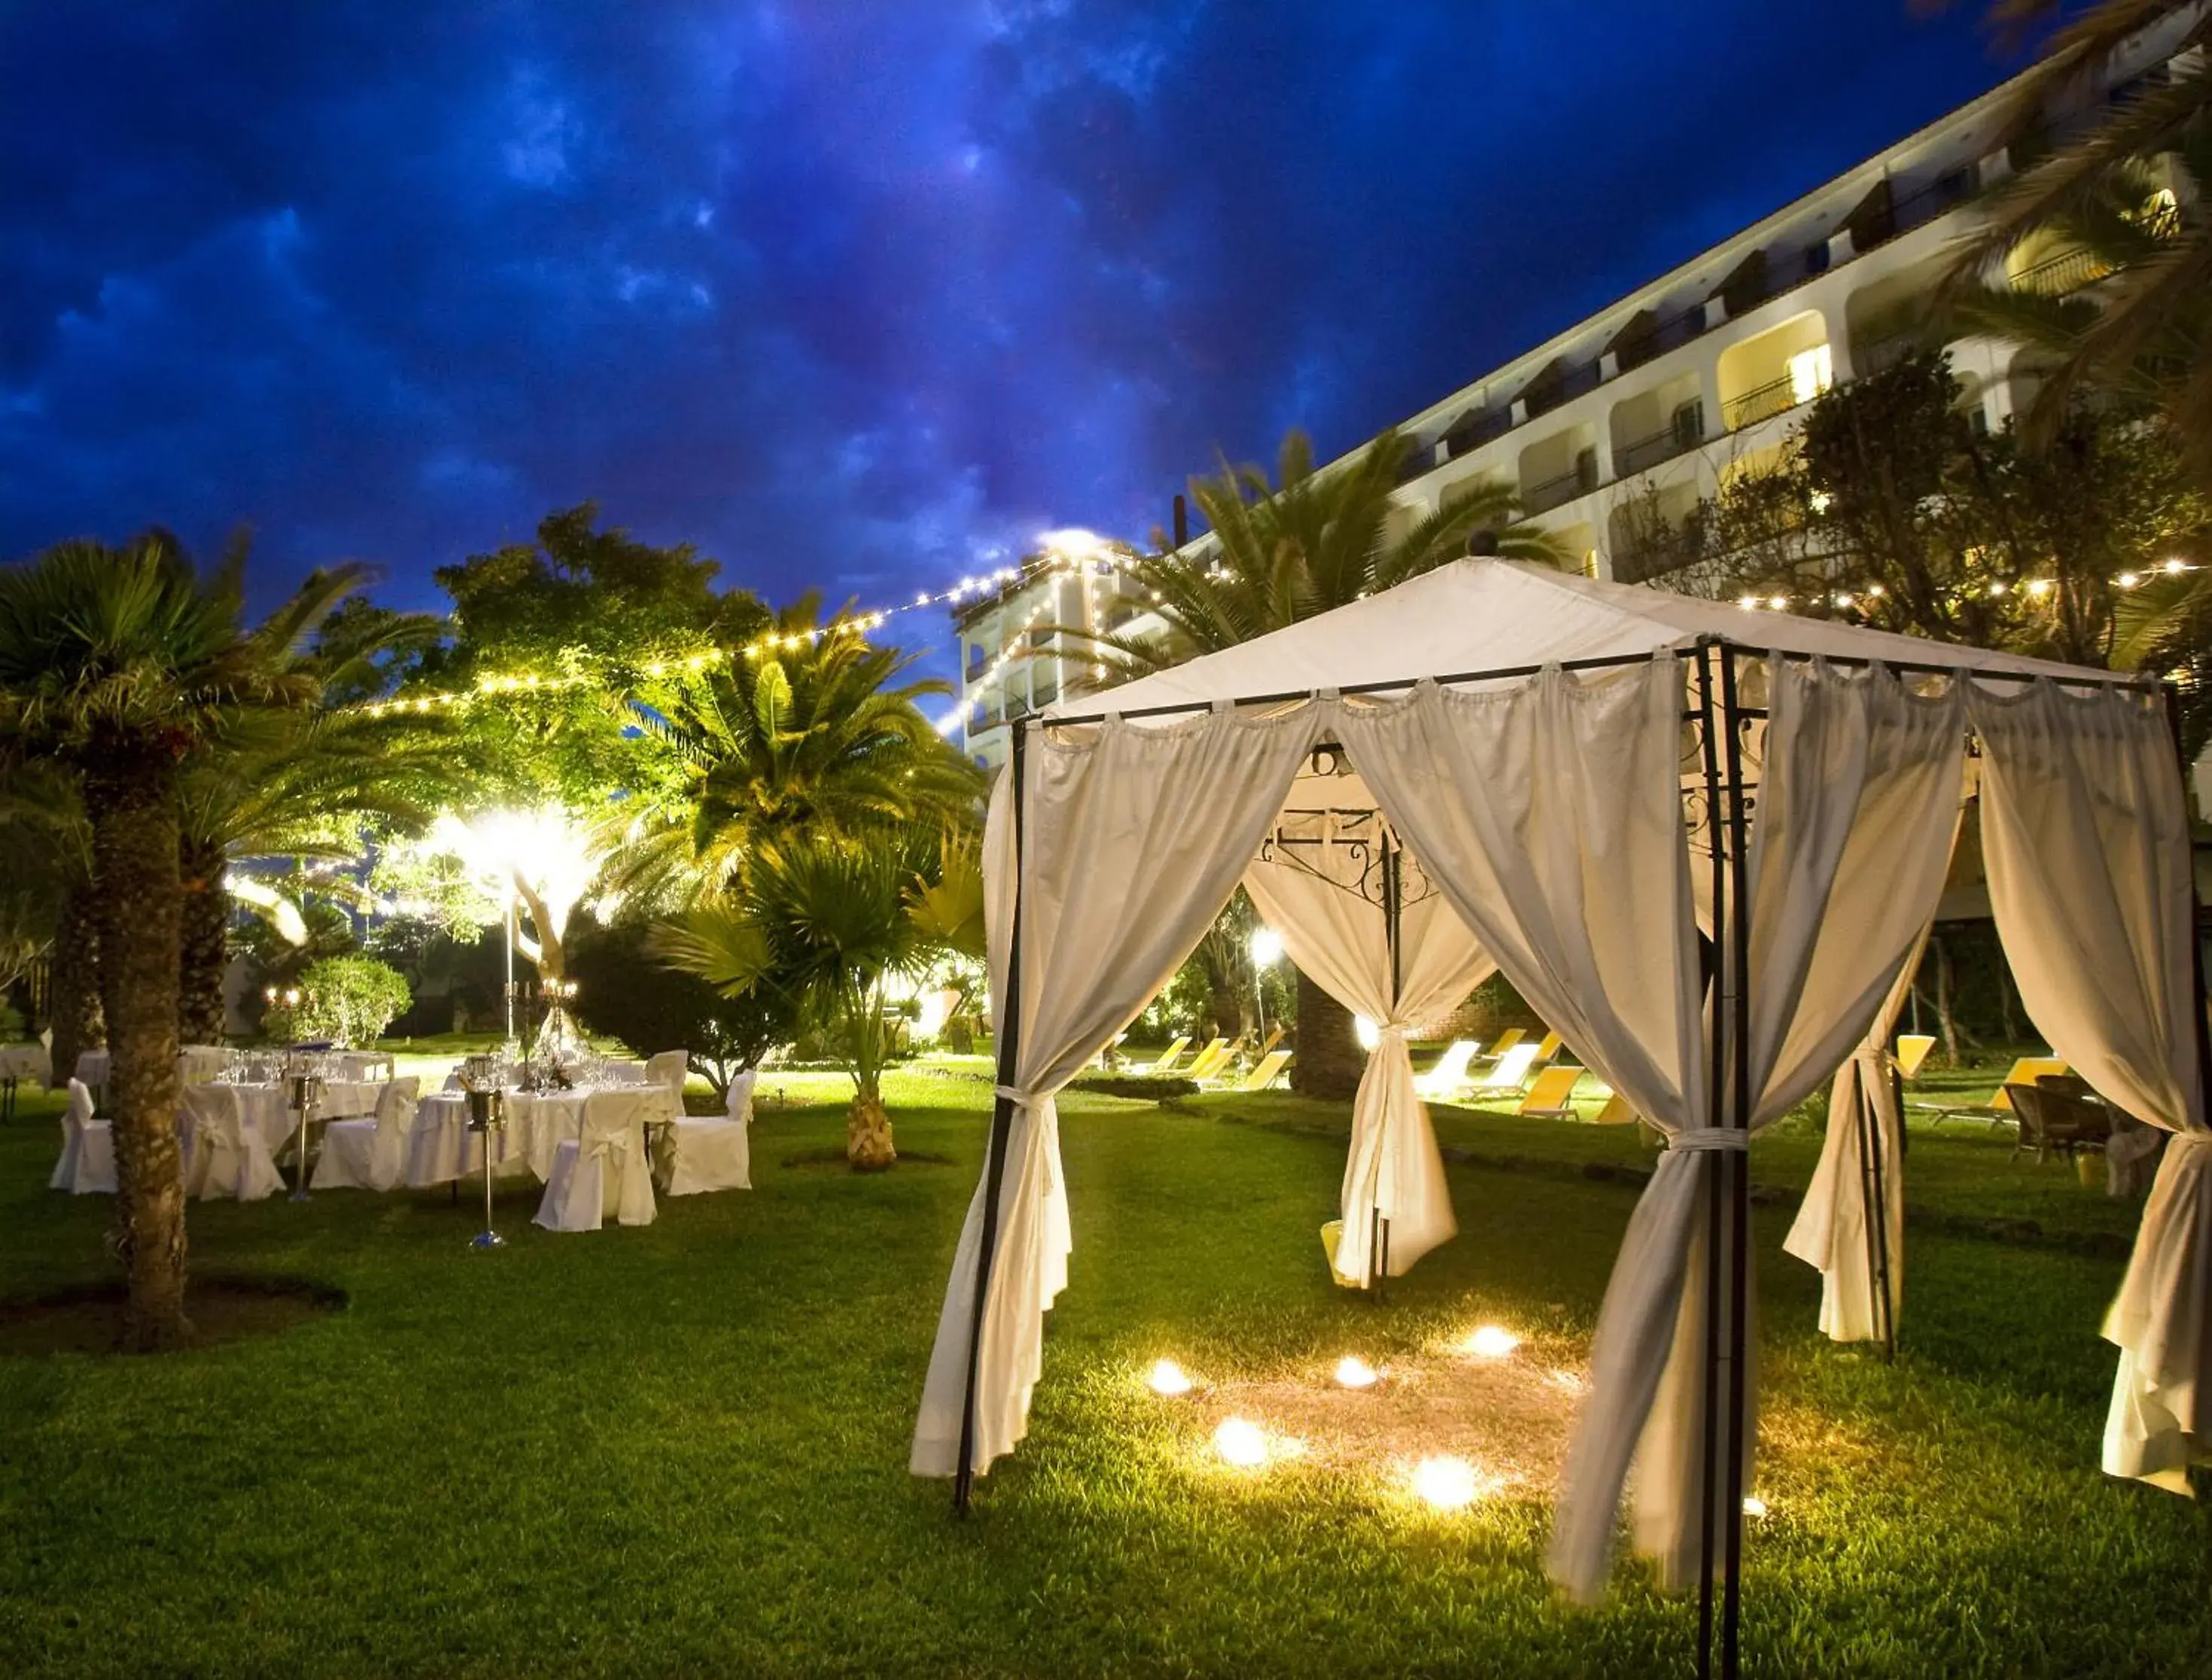 Area and facilities, Banquet Facilities in Delta Hotels by Marriott Giardini Naxos